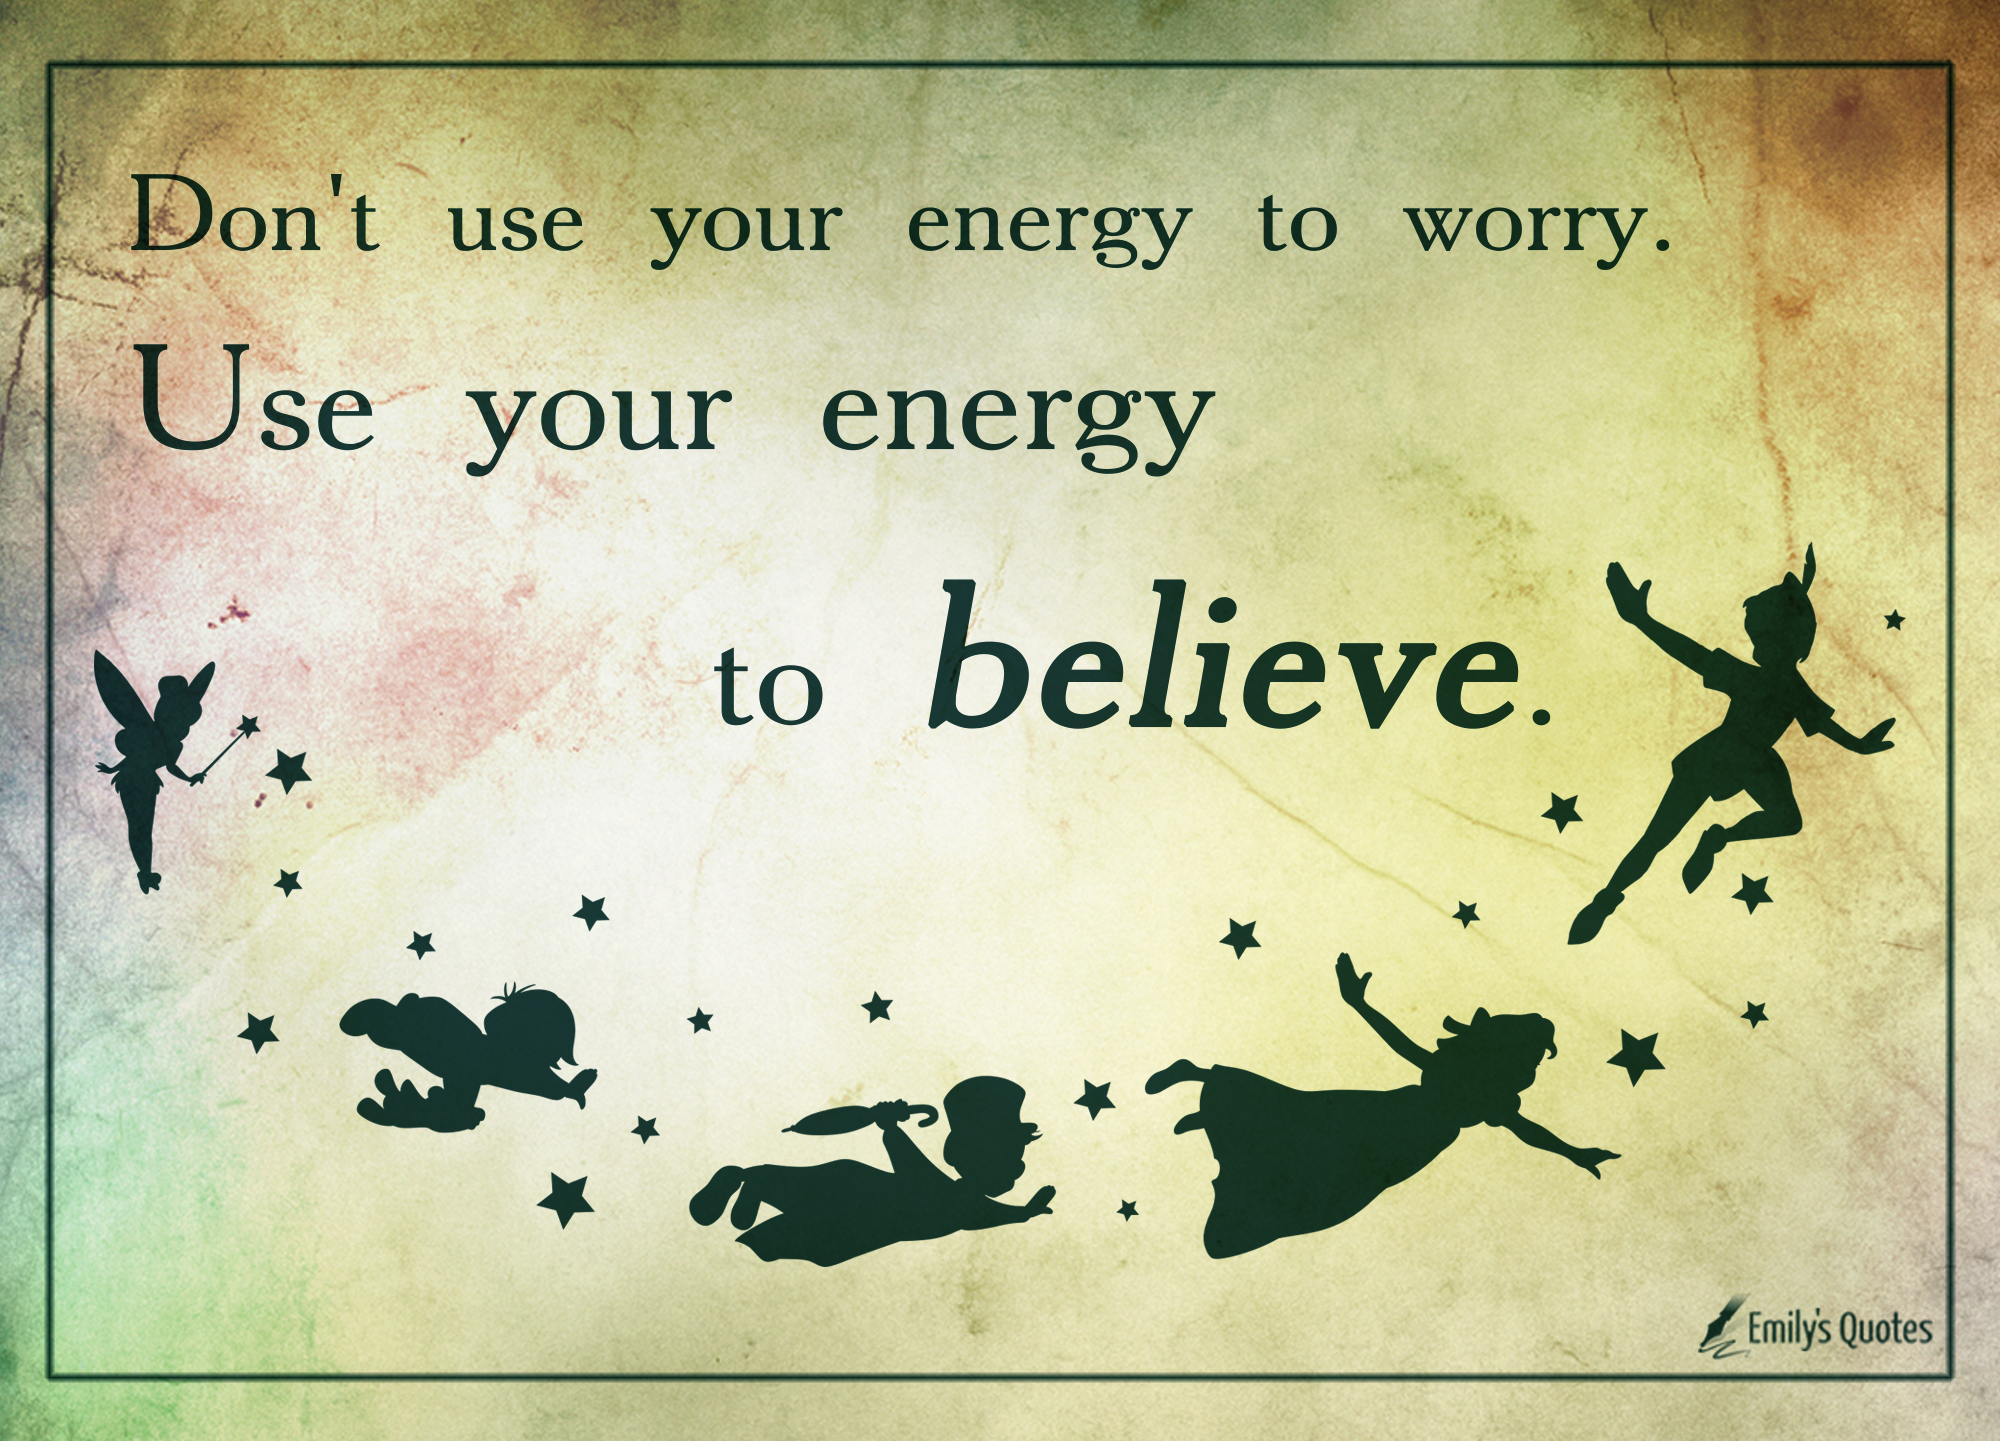 Don’t use your energy to worry. Use your energy to believe